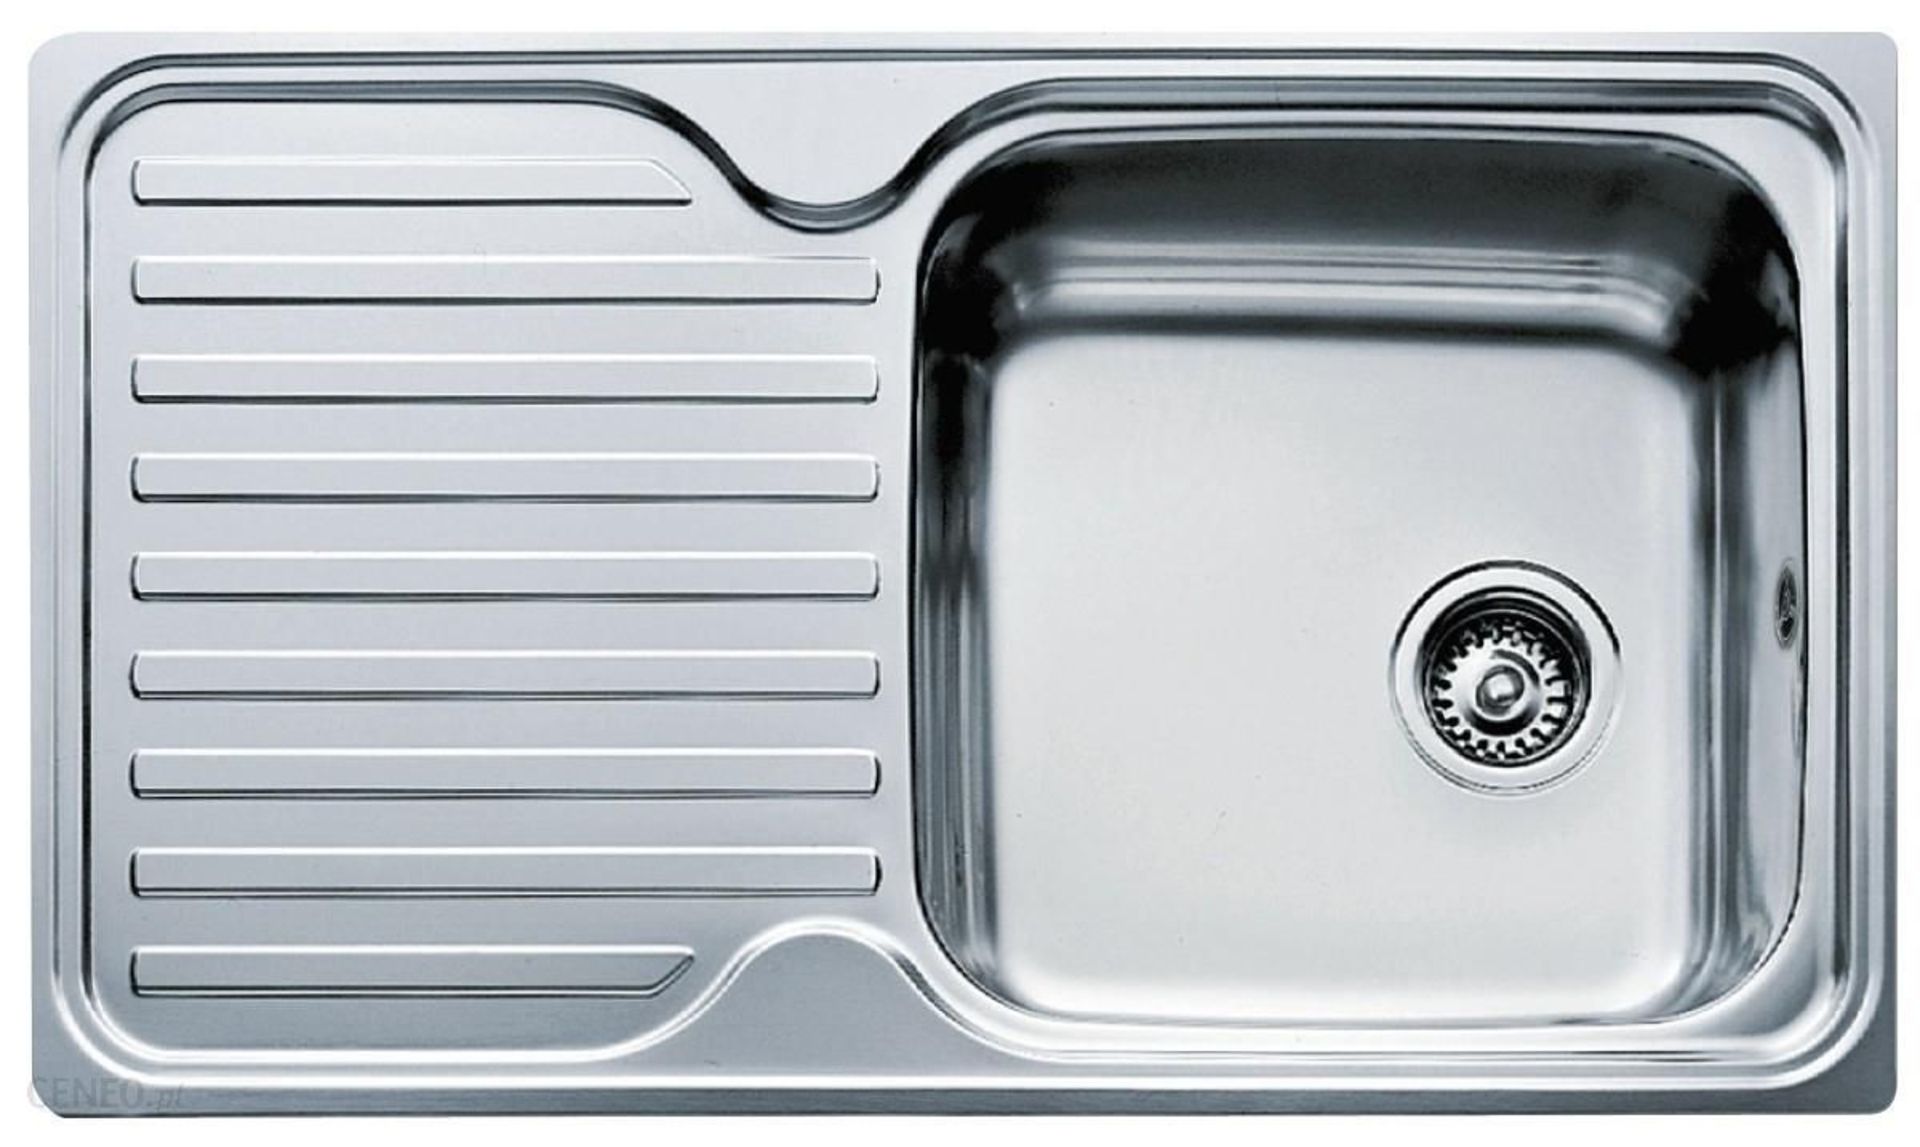 New (P25) Inset Stainless Steel Sink With One Bowl And One Drainer (Left Hand). Inset Sink, One...